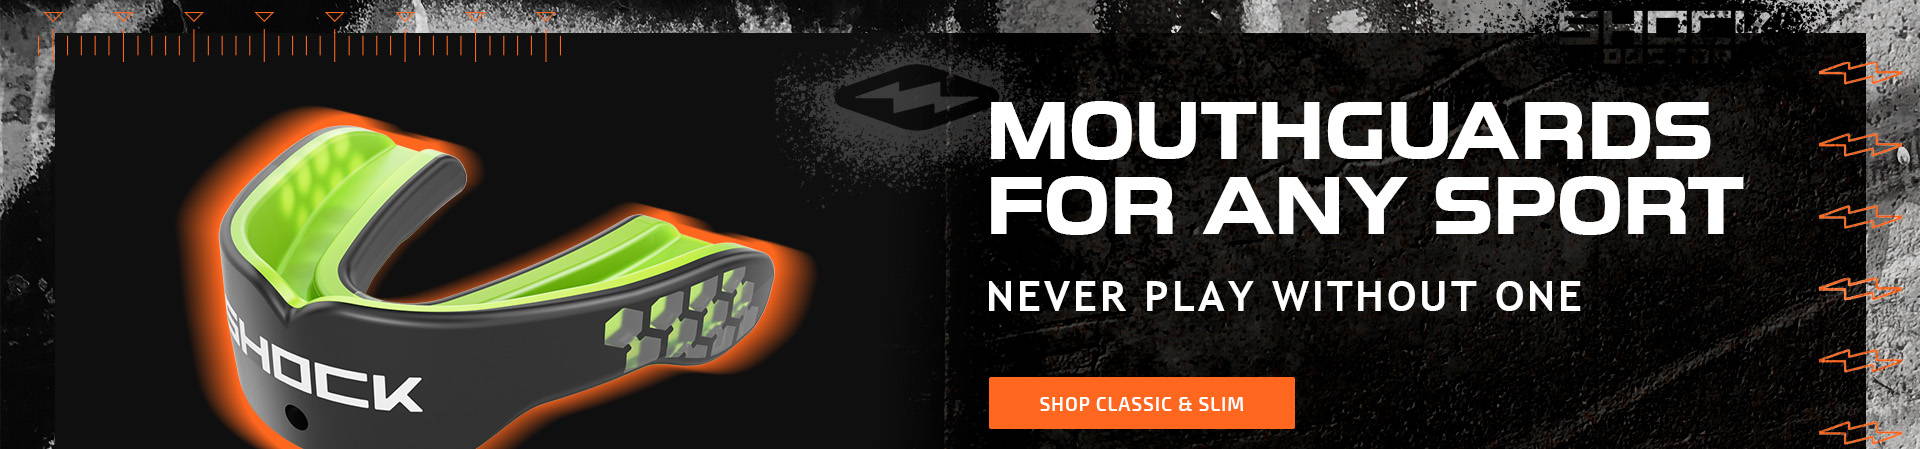 Mouthguards for any sport. never play without one. SHOP CLASSIC & SLIM